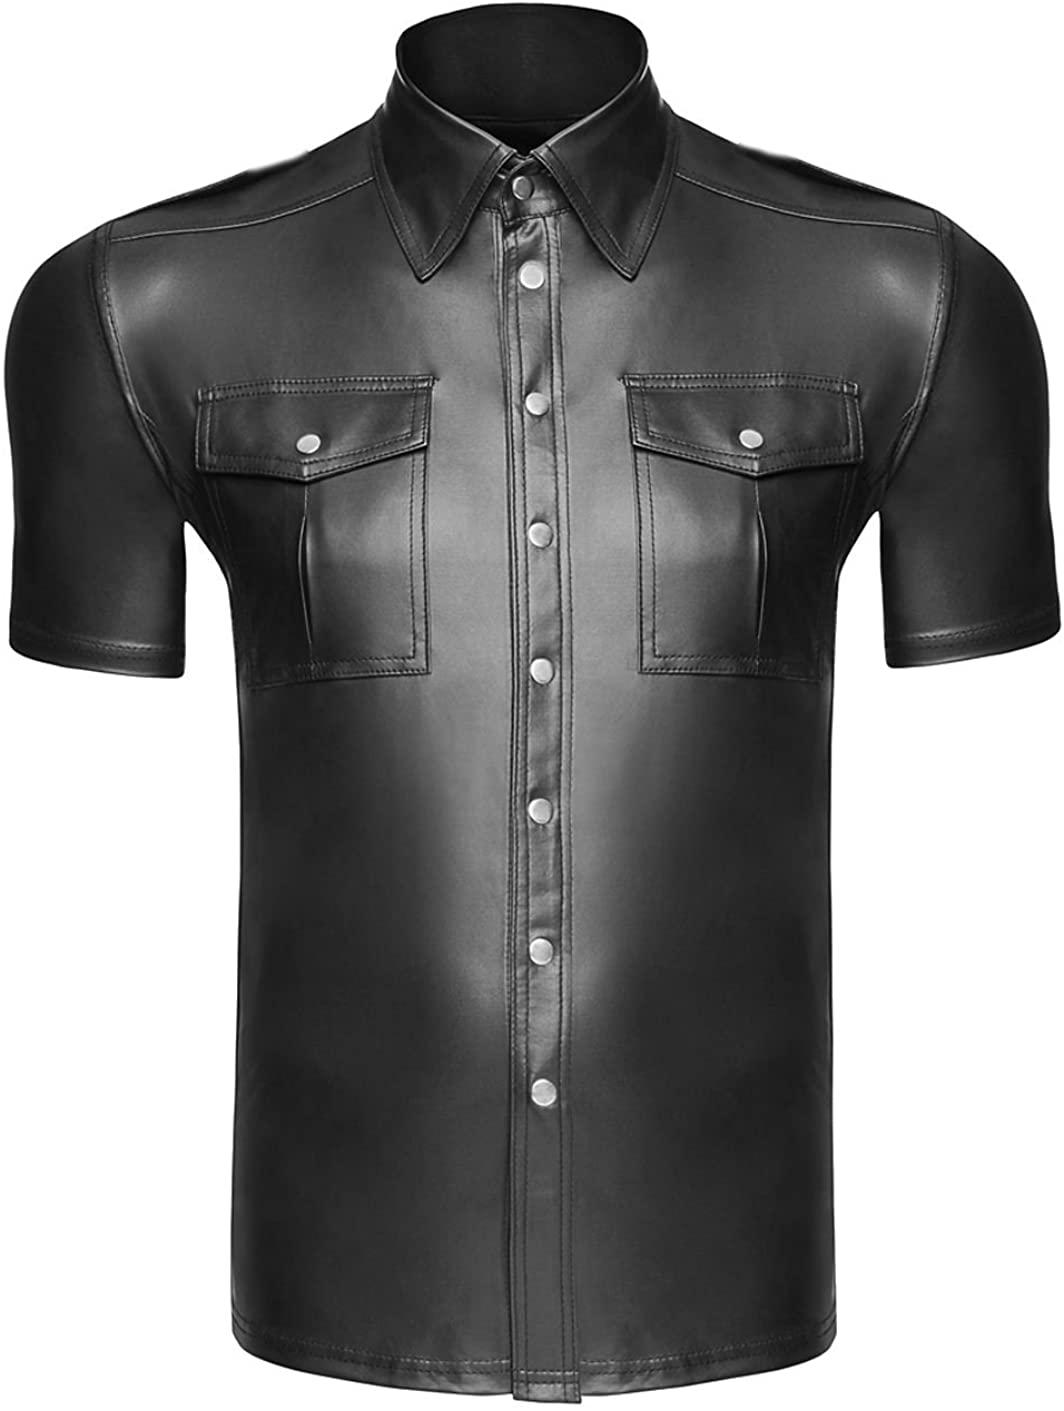 Sexy And Elegant Shirt With Front Pockets - Black